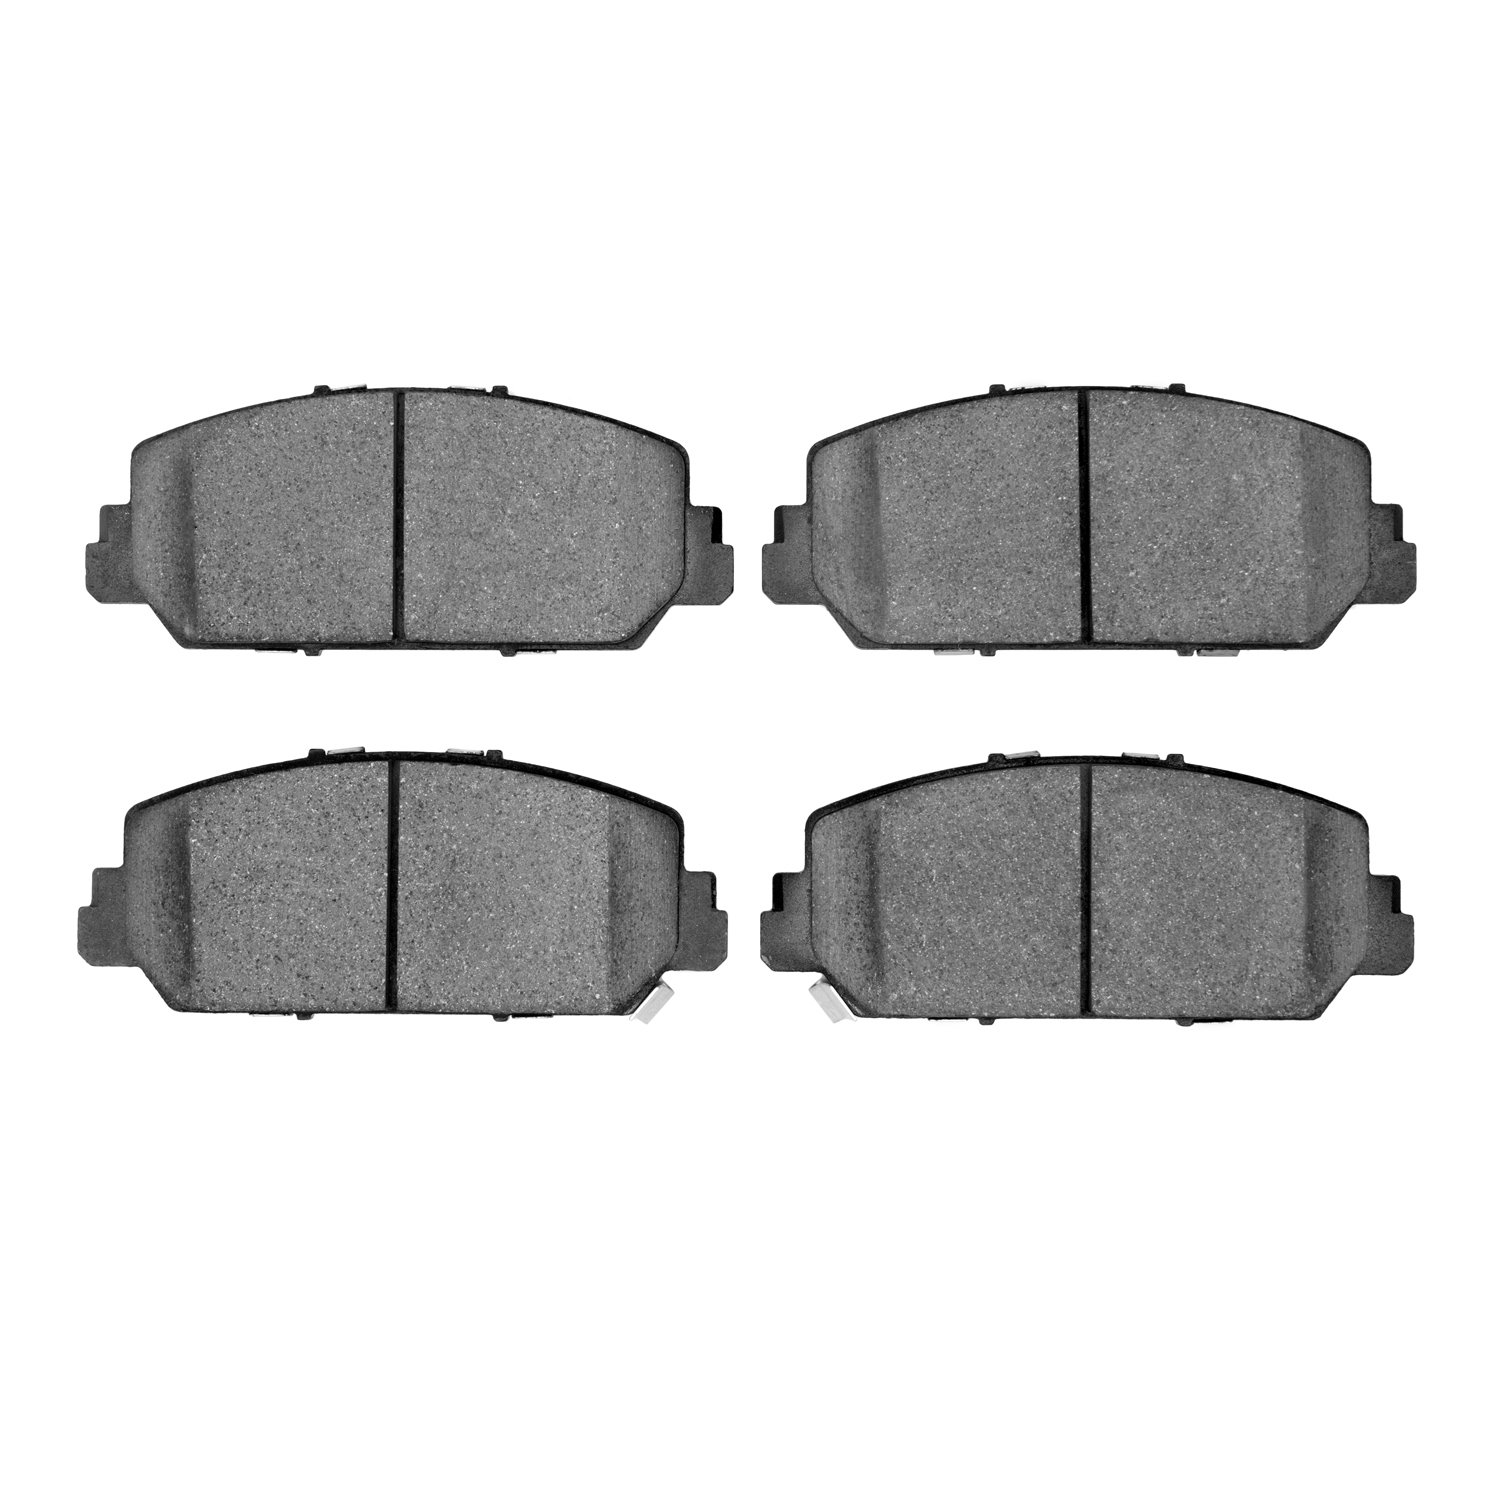 1115-1697-00 Active Performance Low-Metallic Brake Pads, Fits Select Acura/Honda, Position: Front